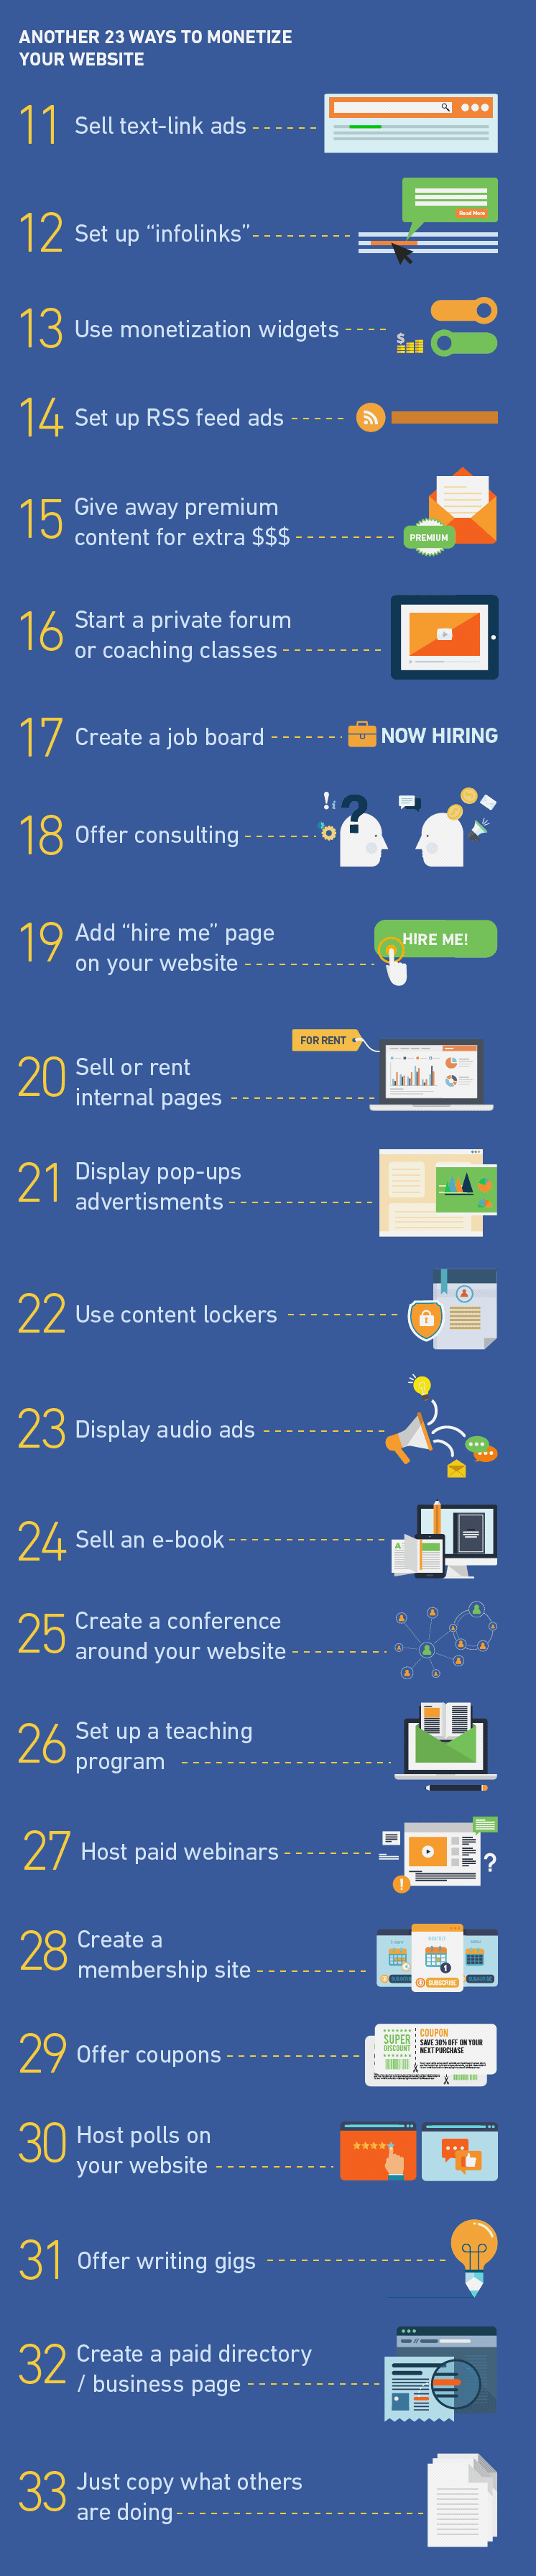 23-ways-to-make-money-with-your-website.png